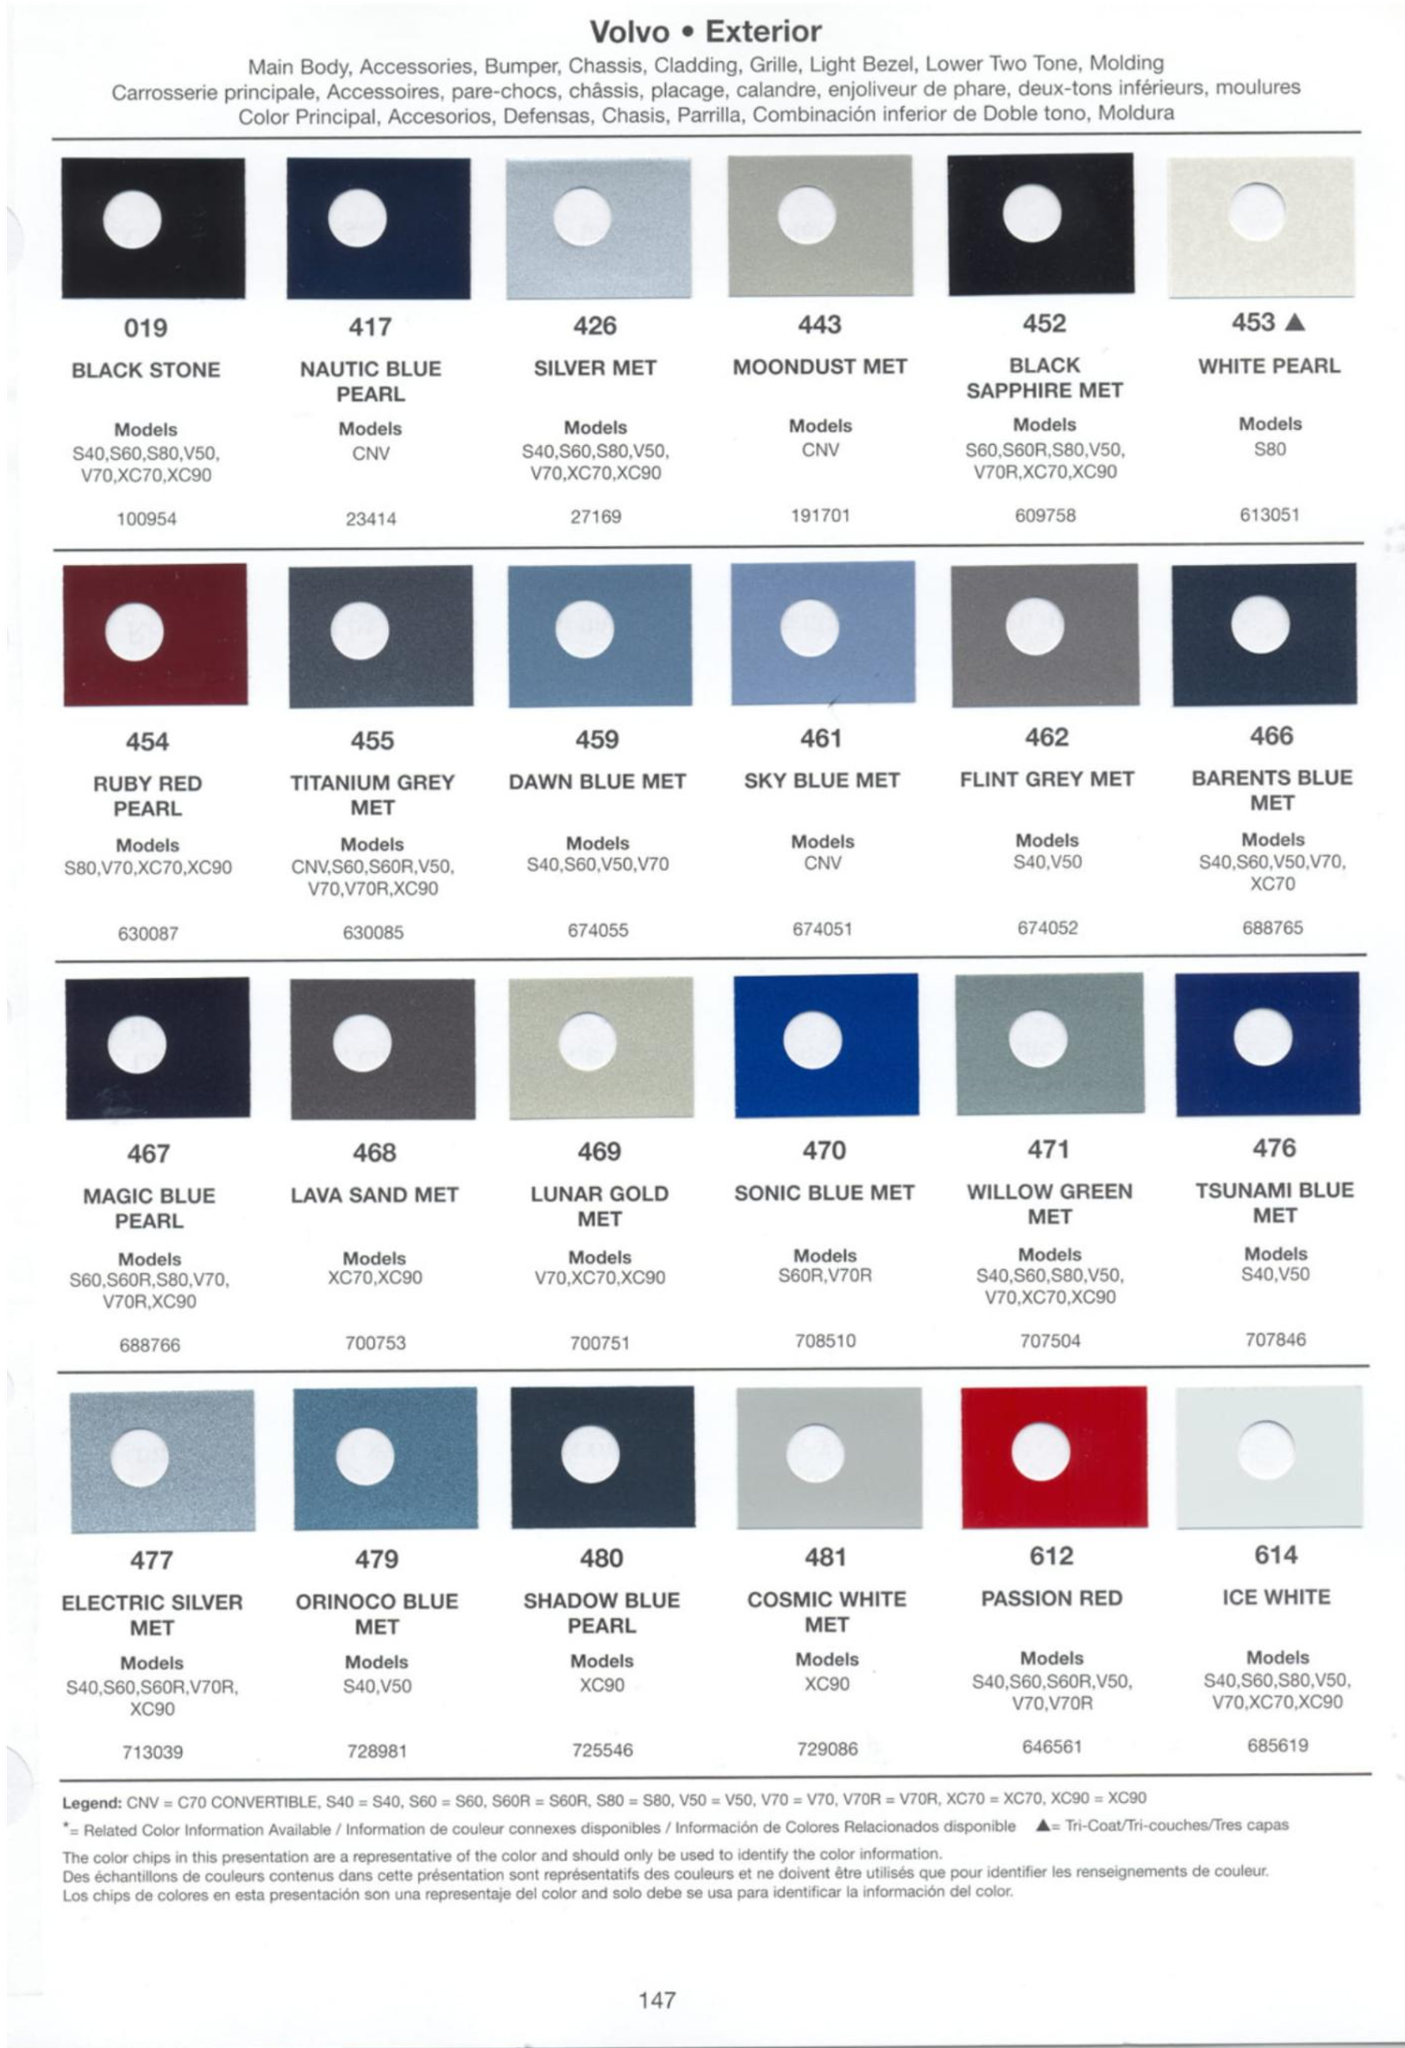 All Volvo Paint Colors, and codes